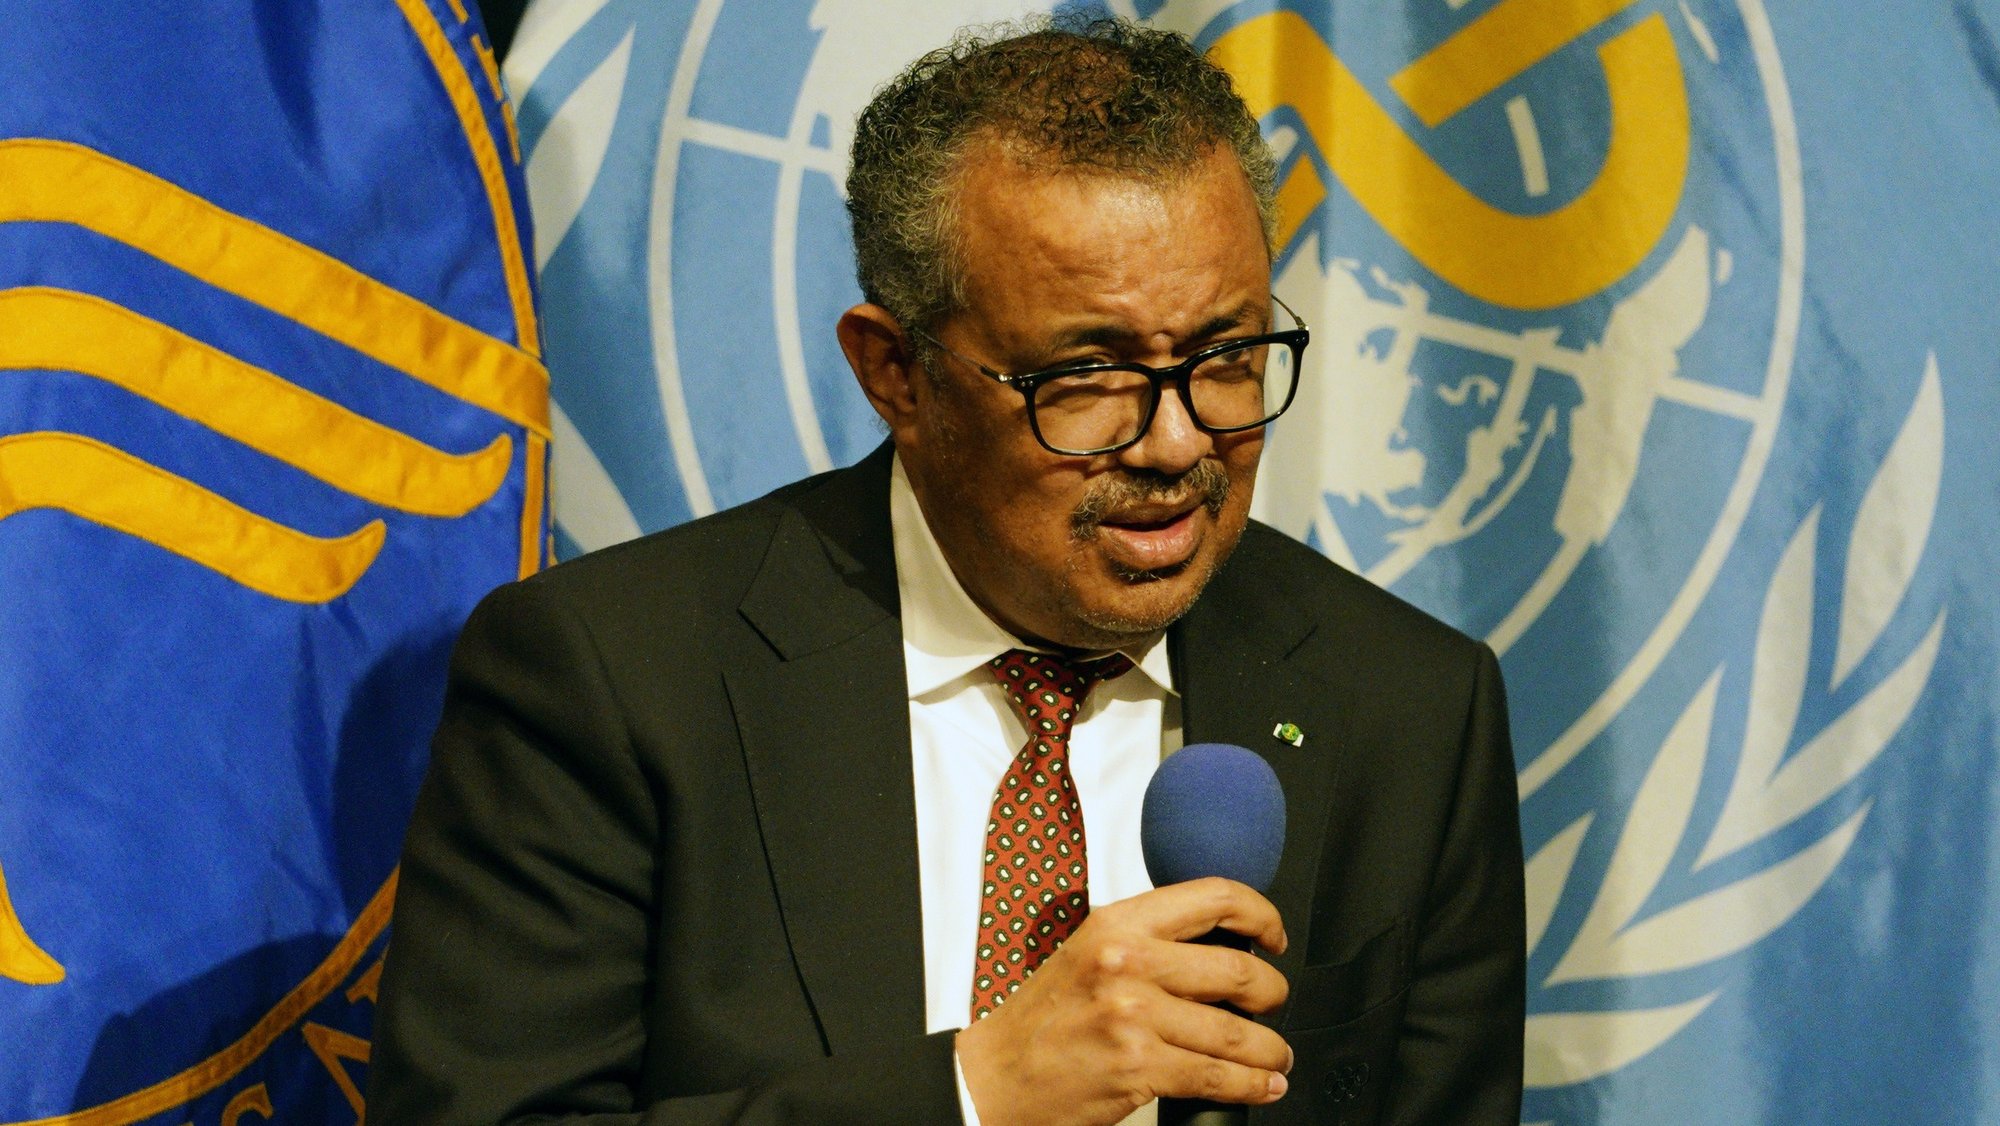 epa09877340 Director General of the World Health Organisation Director-General Dr. Tedros Adhanom Ghebreyesus addresses a joint press conference with Xavier Becerra United States Secretary of Health and Human Services  at the Department for Health and Human Services in Washington DC, USA, 07 April 2022.  EPA/WILL OLIVER